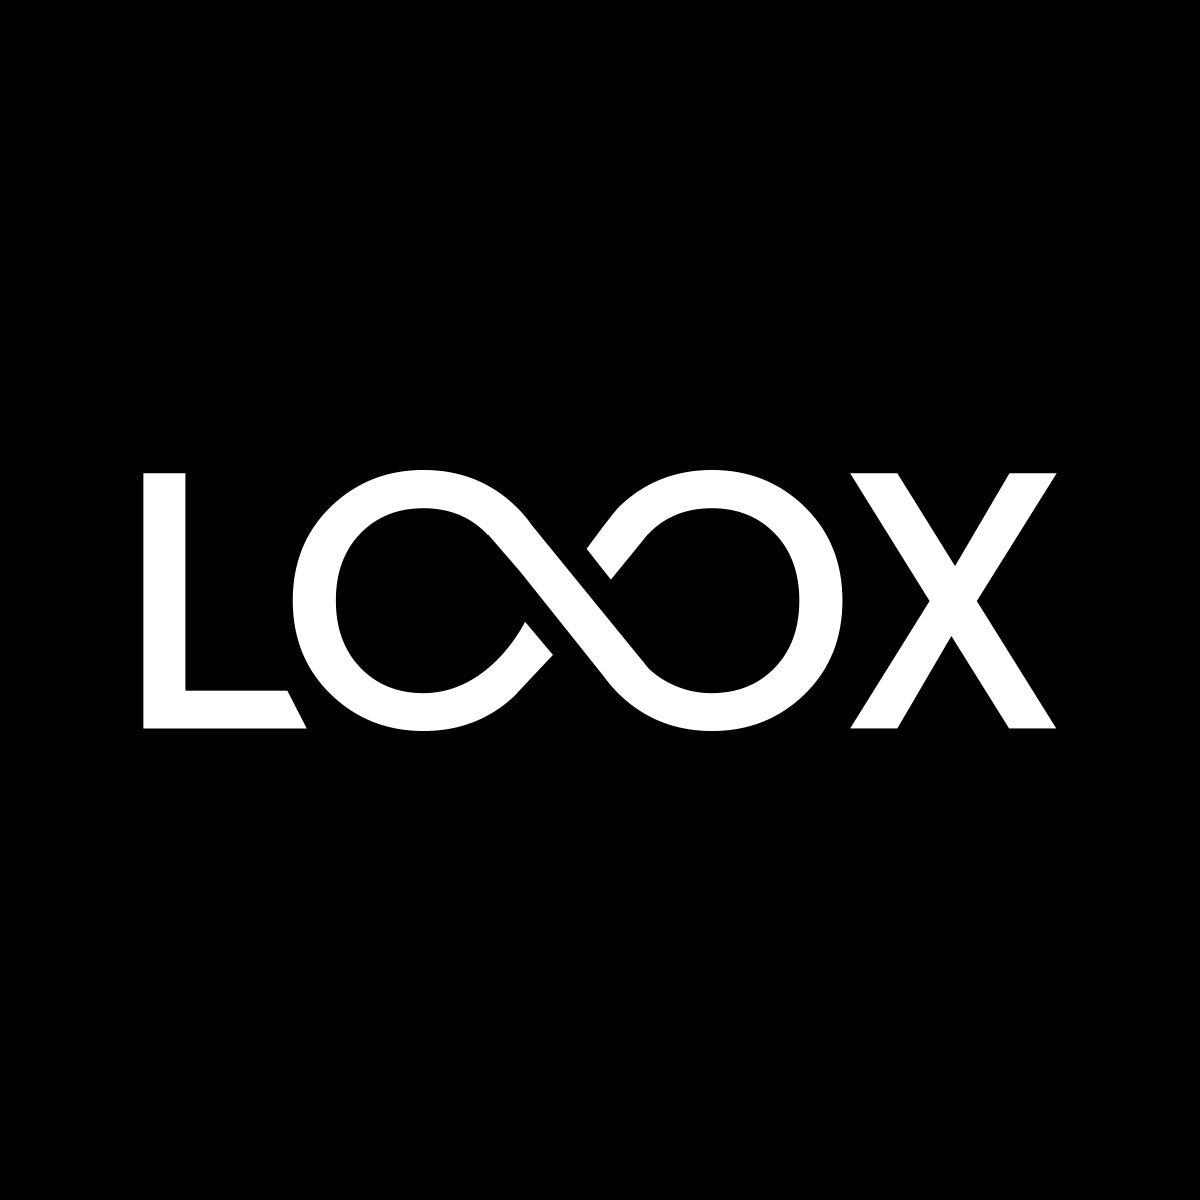 Loox ‑ Product Reviews App